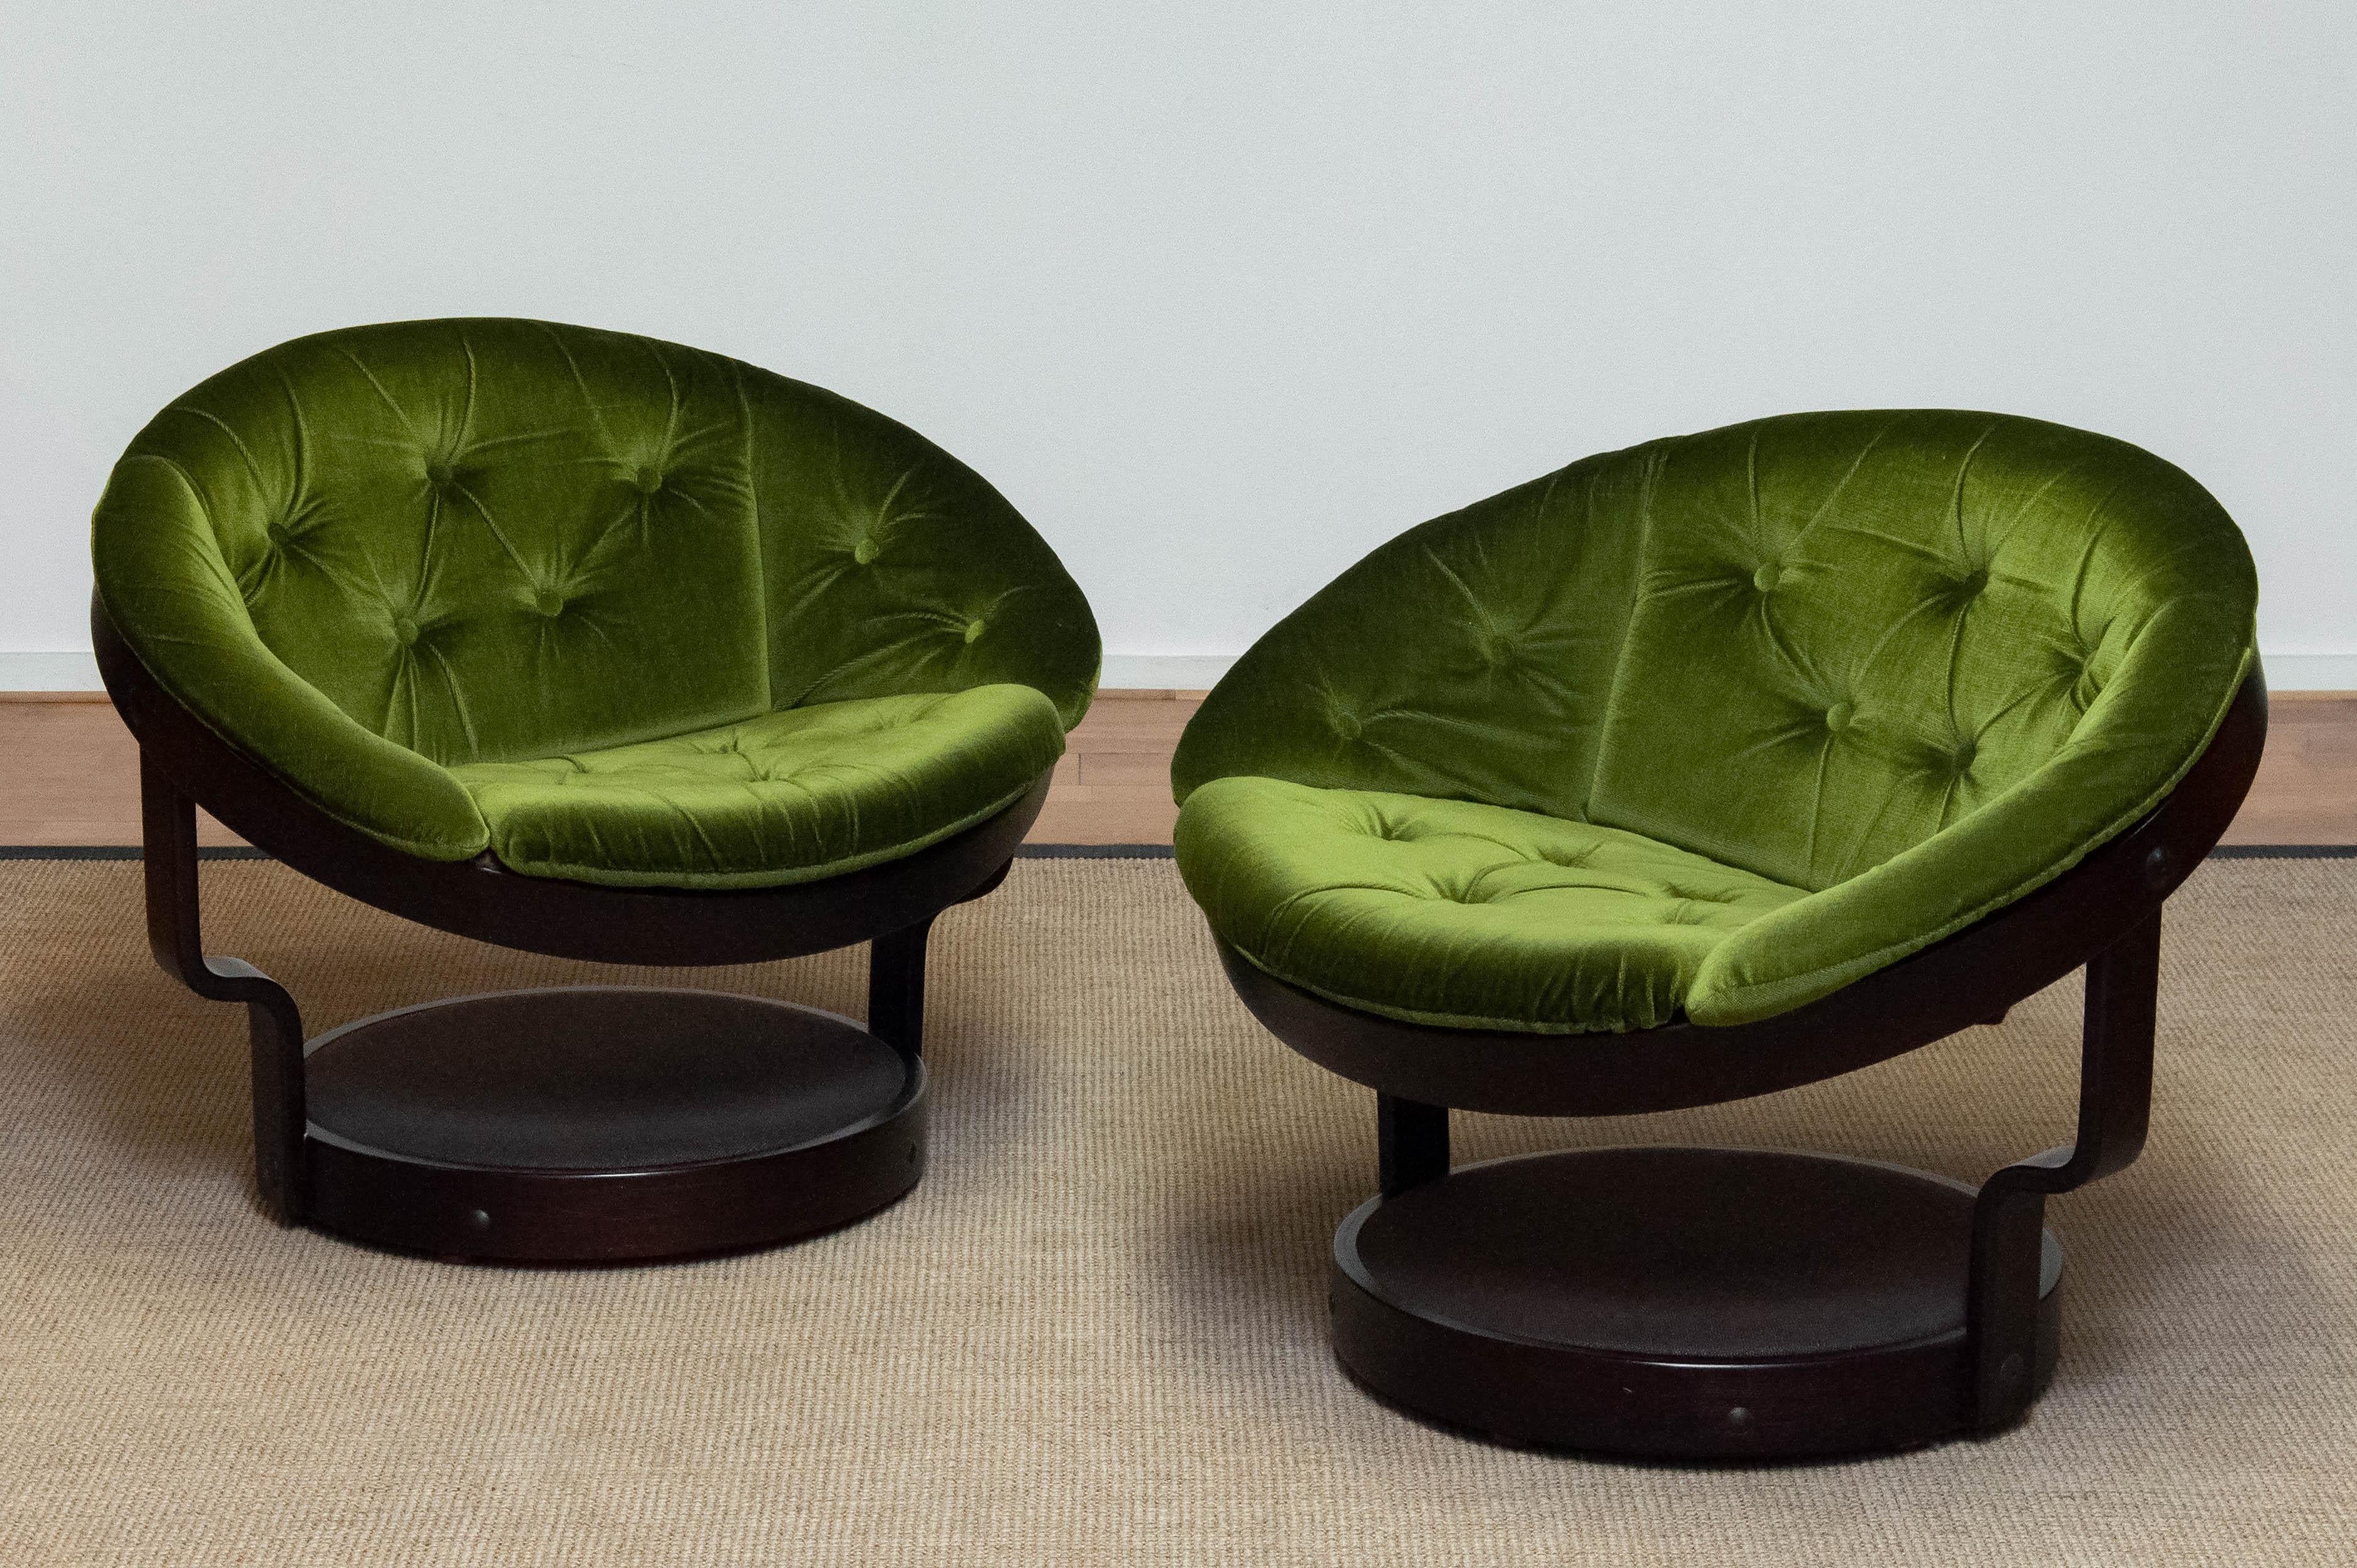 Beautiful set of two Scandinavian modern bentwood ' model Convair' swivel lounge chairs by Oddmund Vad for VAD Trevarefabrik in Norway. Featuring a floating circular bentwood frames and floor stand with tufted green velvet fabric cushions. These